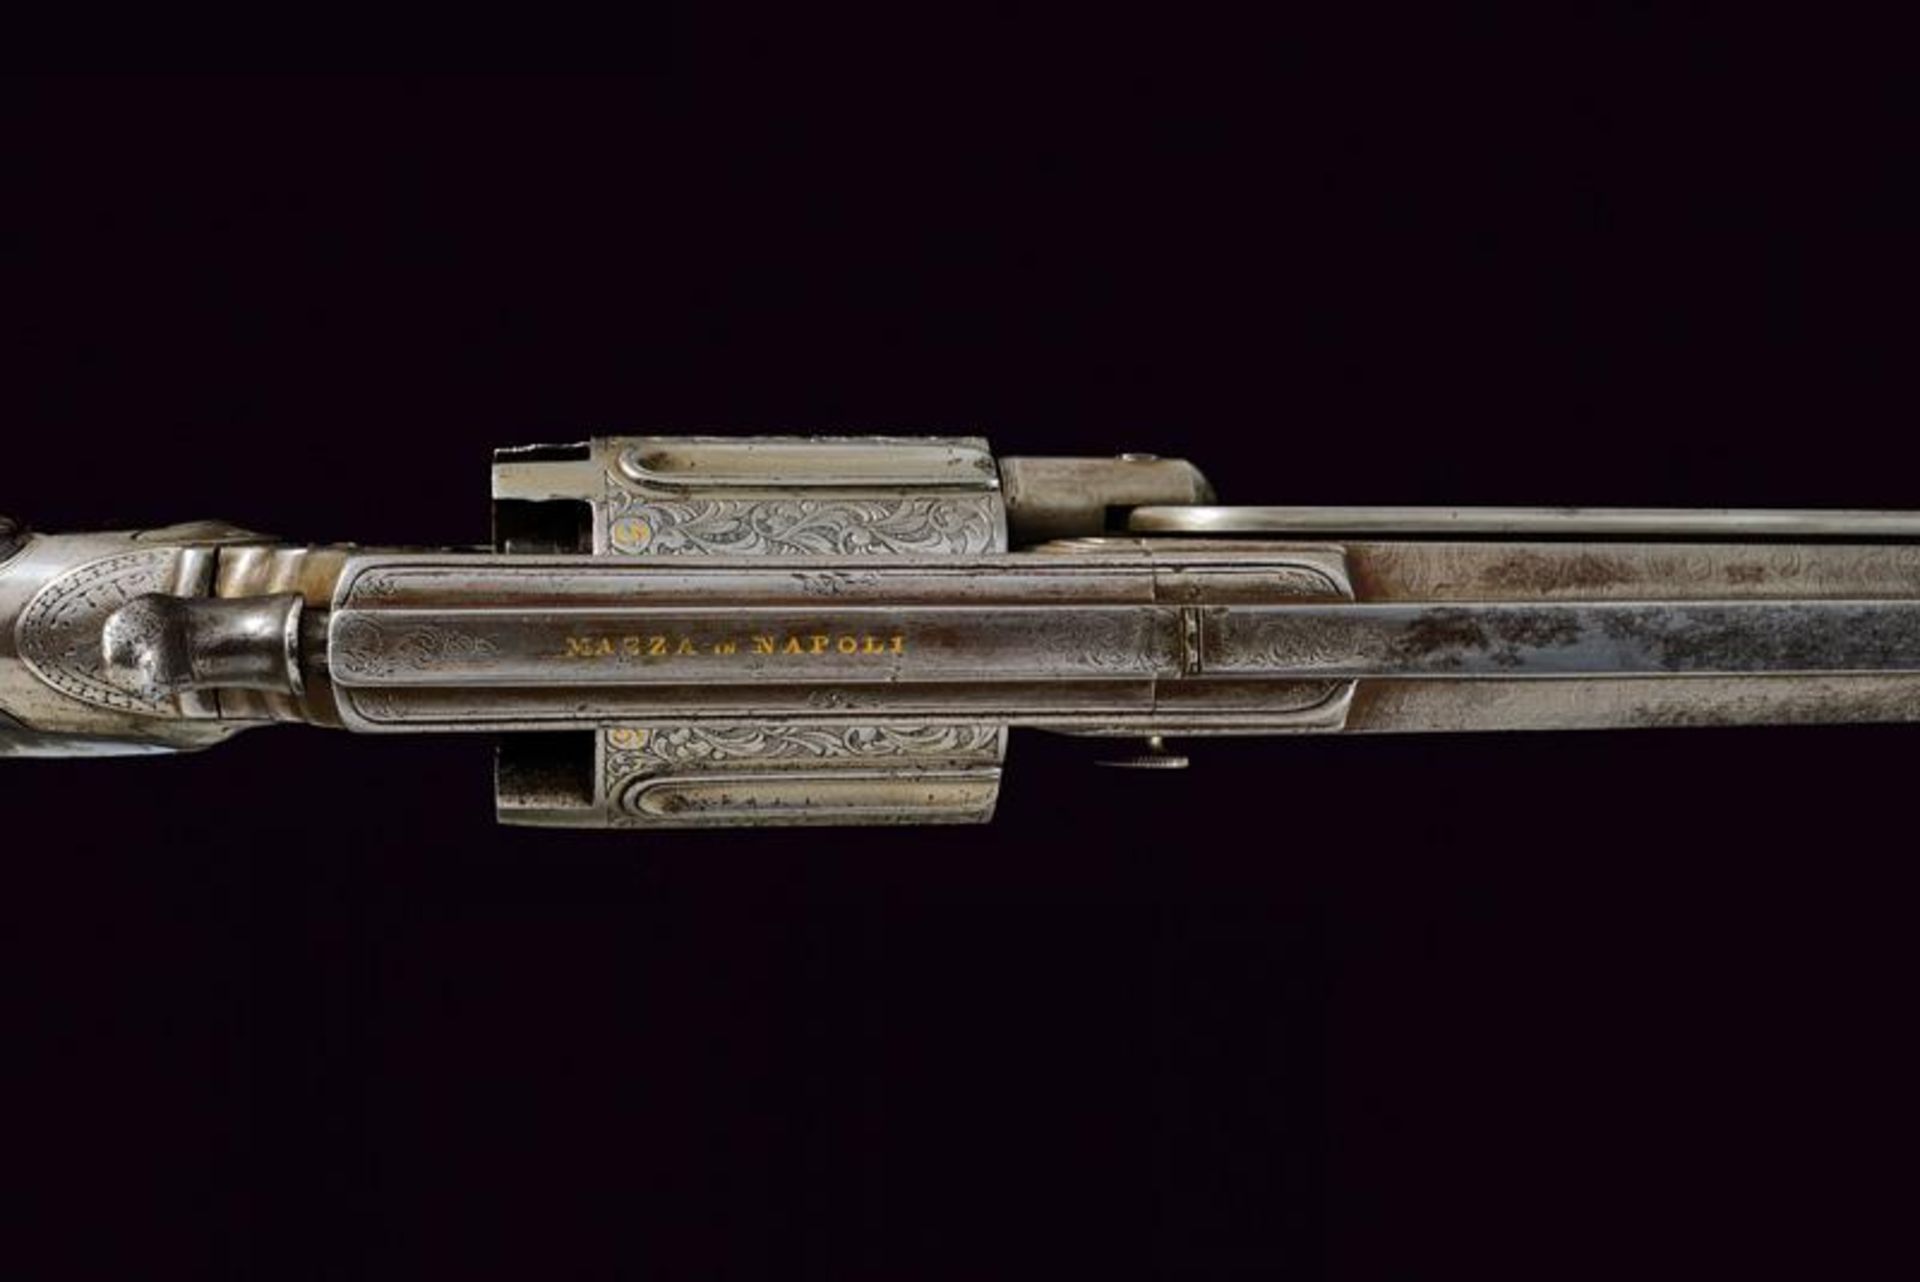 A percussion revolving rifle by Mazza - Image 8 of 11